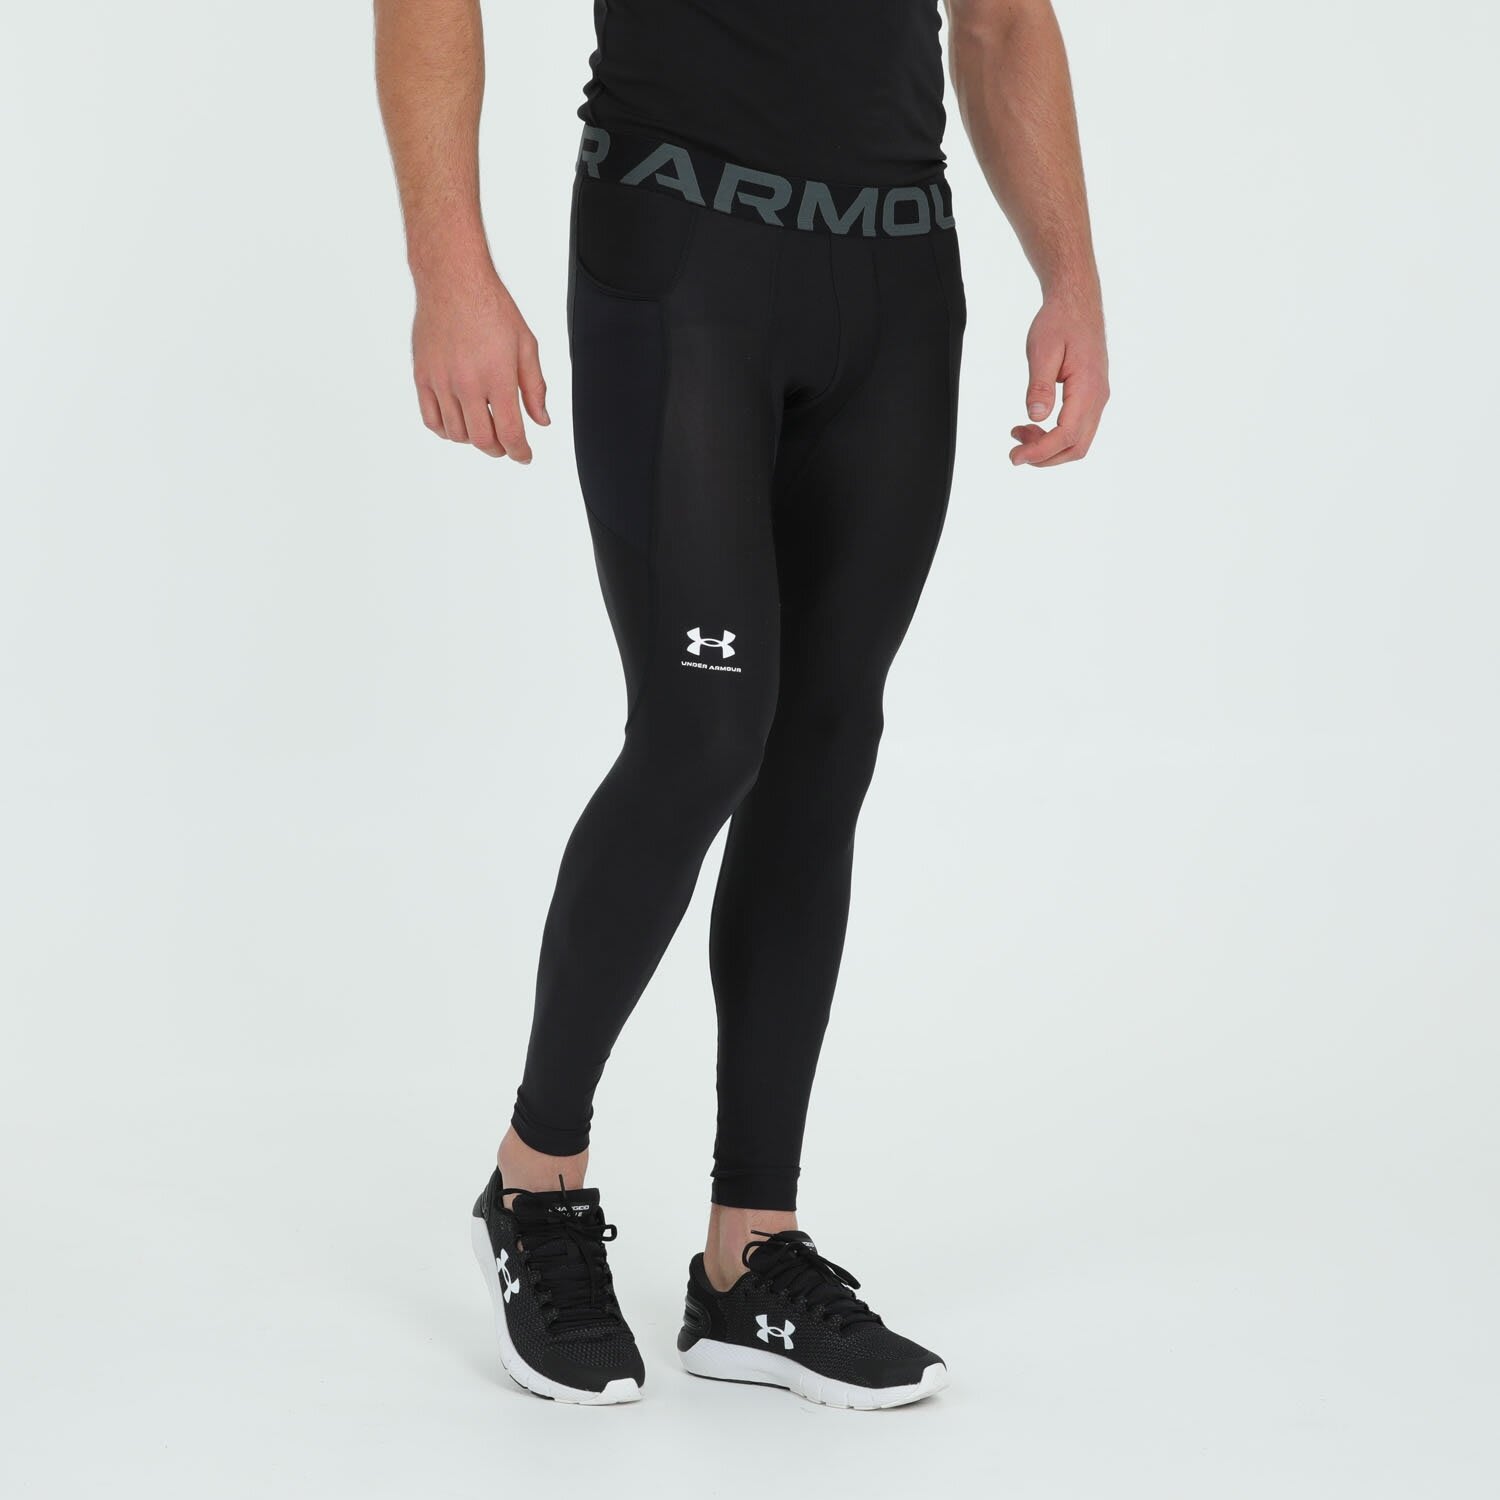  Under Armour Men's CoolSwitch Run Tights, Black (001